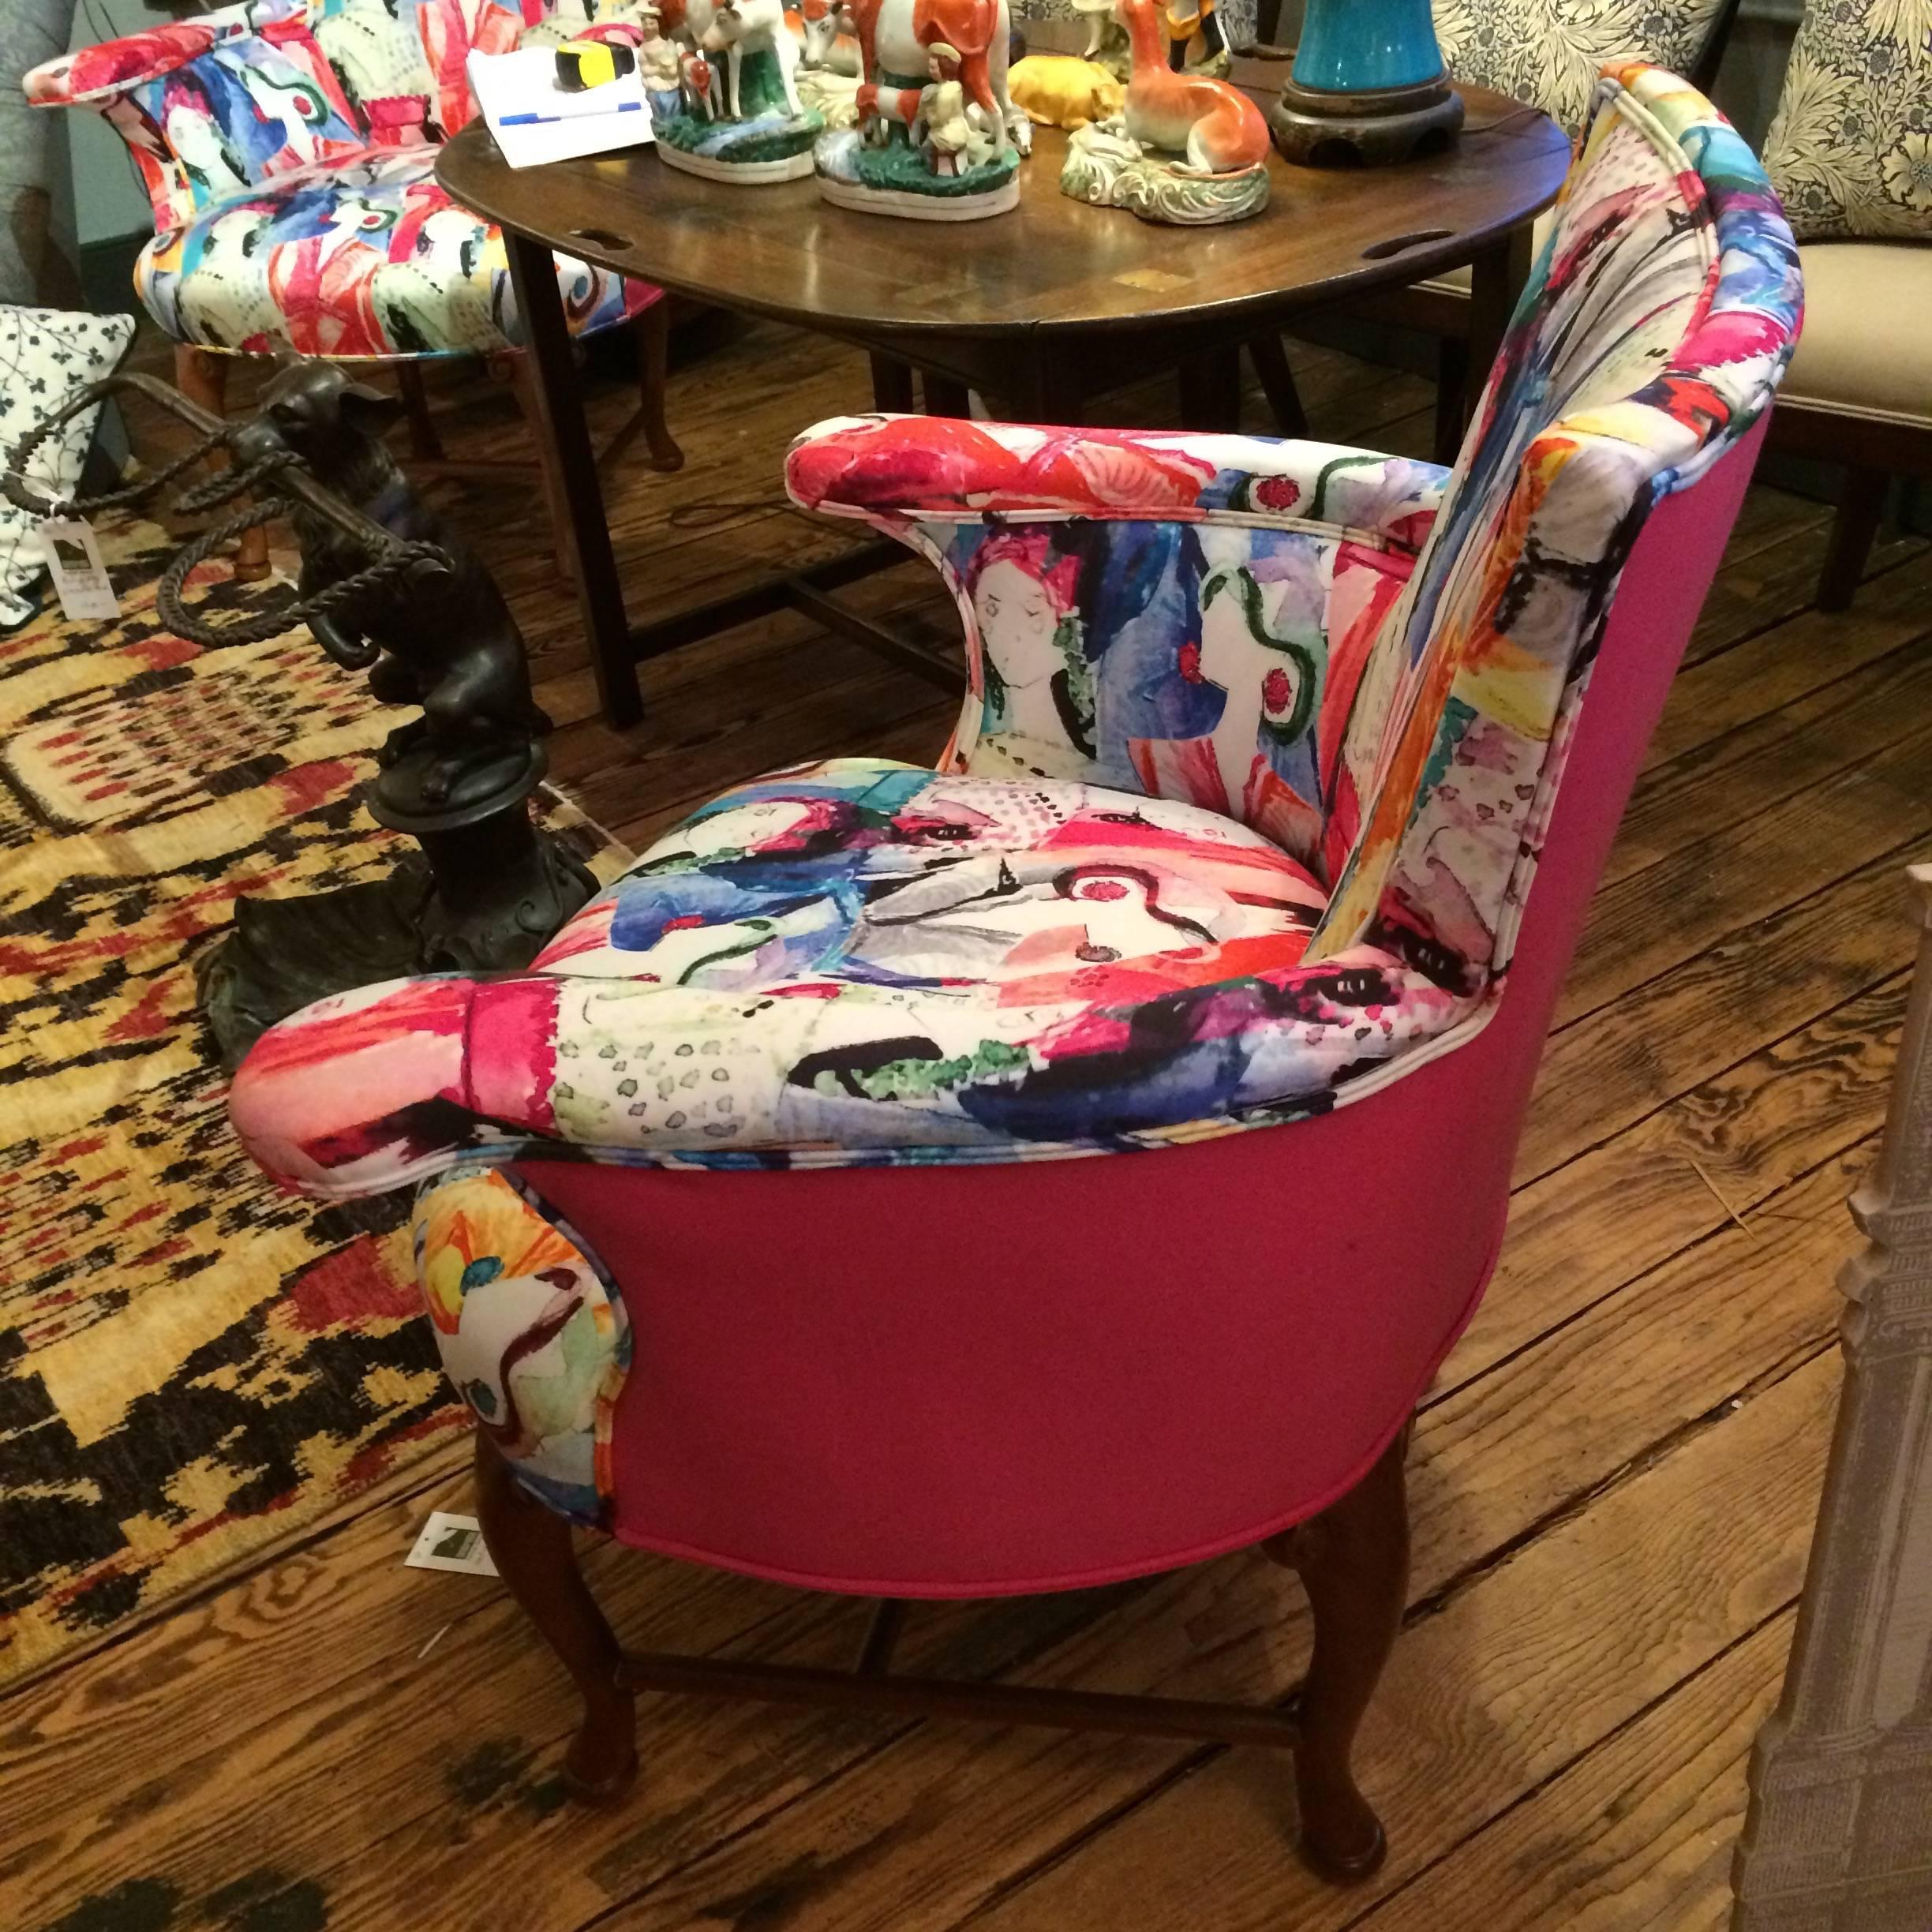 Sophisticated Oly armchairs in a compact size with eye-catching cotton and quill hand screened upholstery having fashionable lady's faces on the front and hot pink solid fabric on the back. Measure: Seat height 18.5.